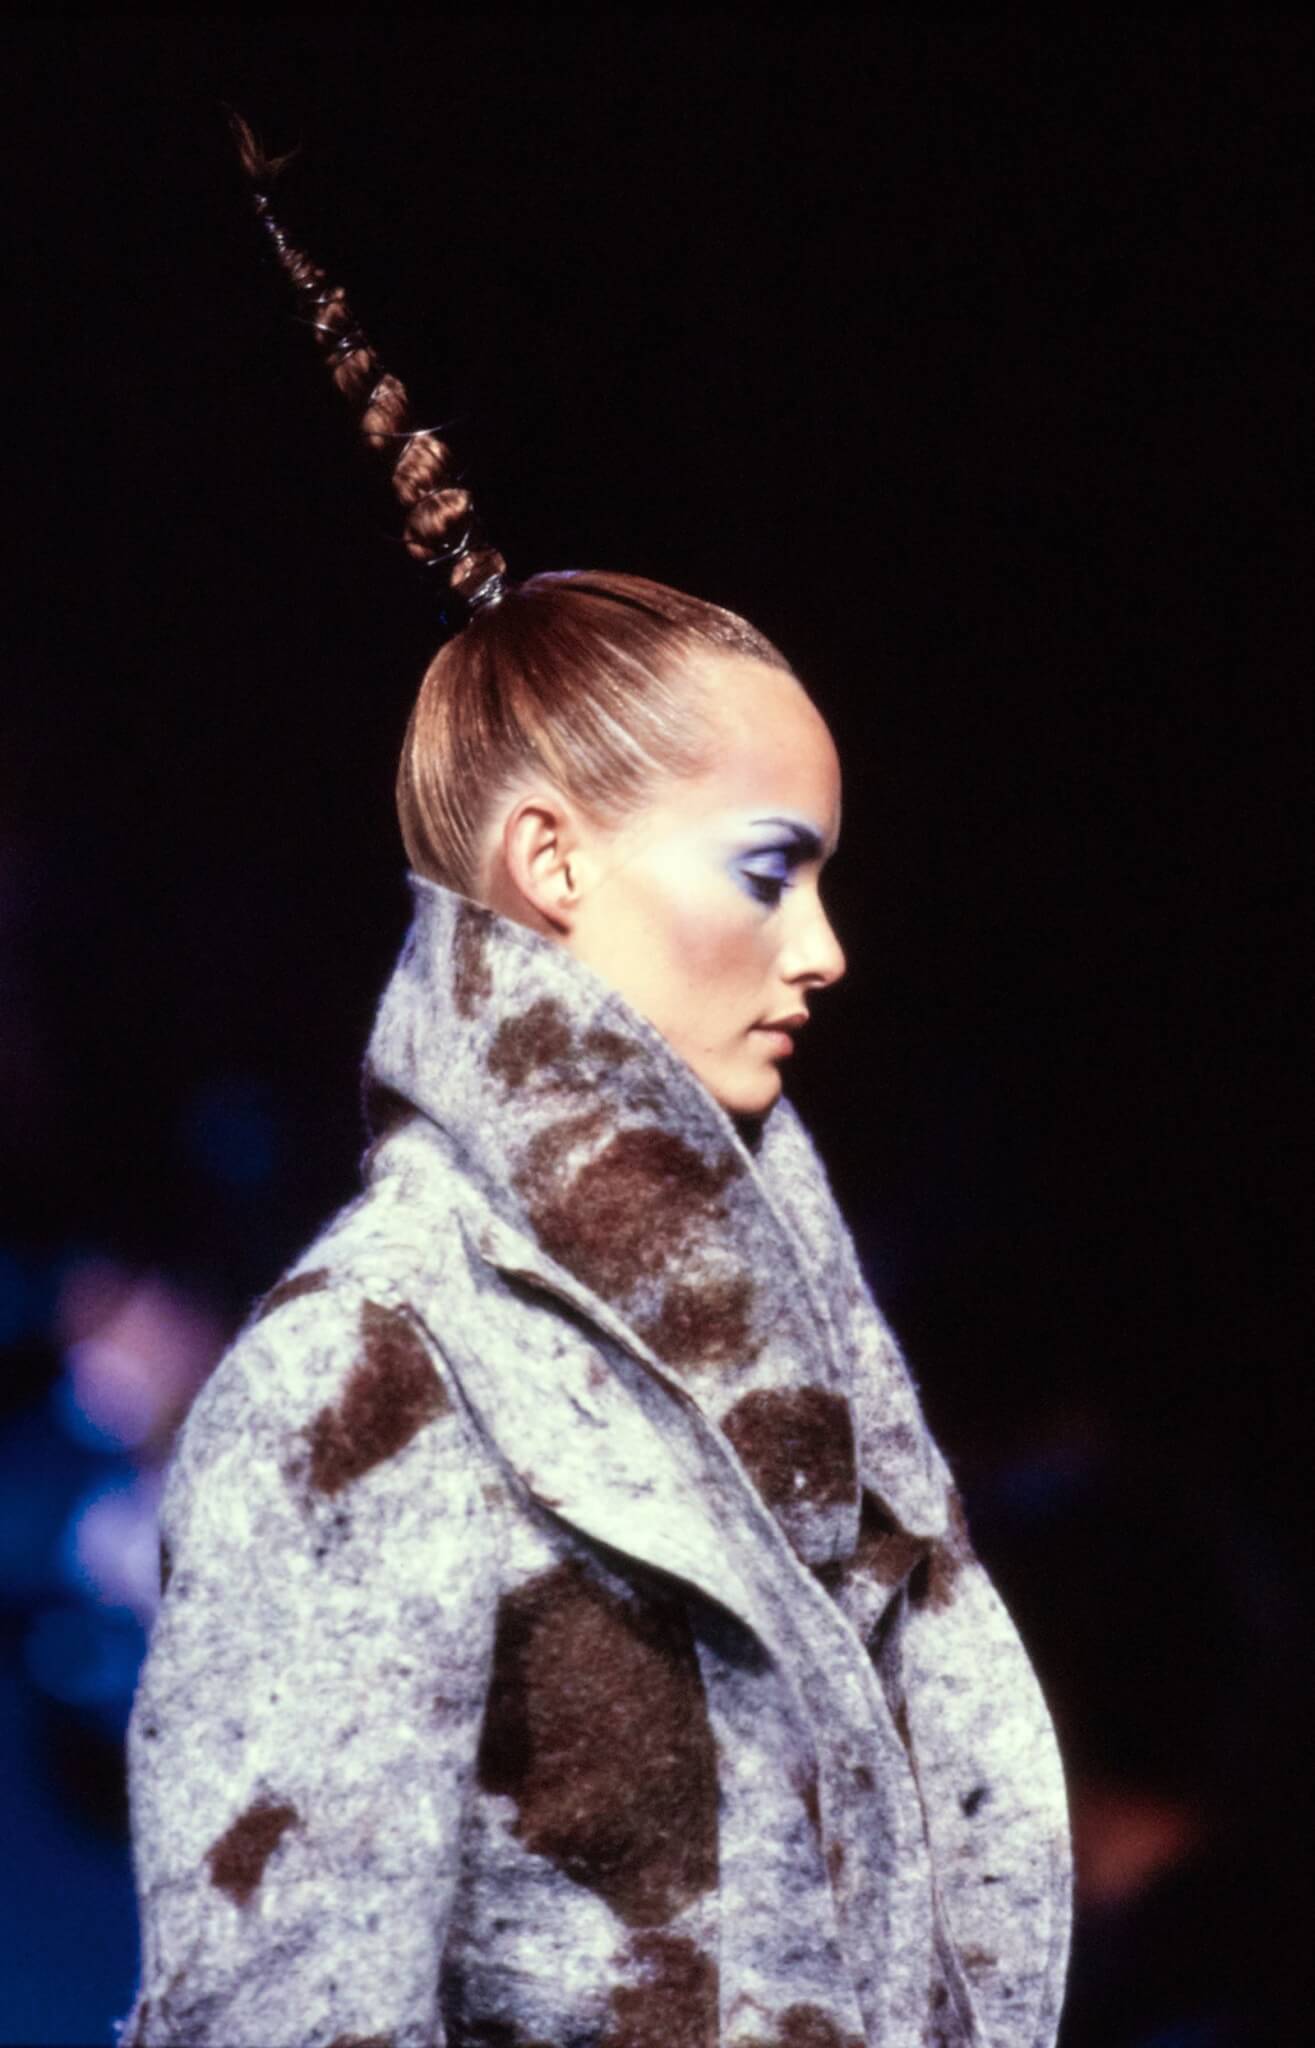 From Films to Catwalks: Hairstyles We Can’t Forget